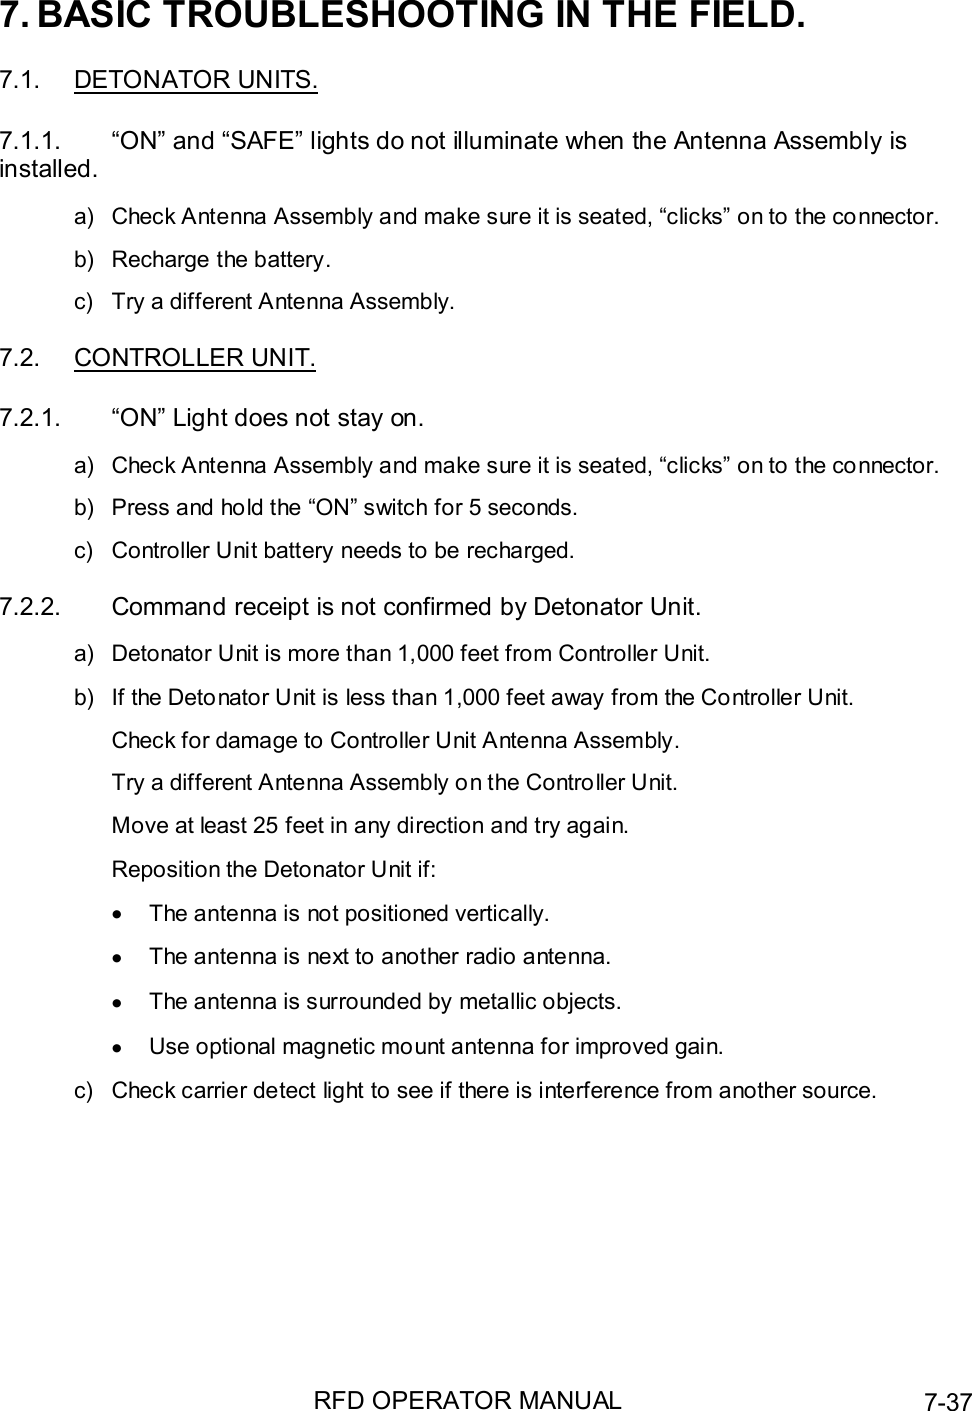 RFD OPERATOR MANUAL 7-377. BASIC TROUBLESHOOTING IN THE FIELD.7.1. DETONATOR UNITS.7.1.1.  “ON” and “SAFE” lights do not illuminate when the Antenna Assembly isinstalled.a)  Check Antenna Assembly and make sure it is seated, “clicks” on to the connector.b)  Recharge the battery.c)  Try a different Antenna Assembly.7.2. CONTROLLER UNIT.7.2.1.  “ON” Light does not stay on.a)  Check Antenna Assembly and make sure it is seated, “clicks” on to the connector.b)  Press and hold the “ON” switch for 5 seconds.c)  Controller Unit battery needs to be recharged.7.2.2.  Command receipt is not confirmed by Detonator Unit.a)  Detonator Unit is more than 1,000 feet from Controller Unit.b)  If the Detonator Unit is less than 1,000 feet away from the Controller Unit.Check for damage to Controller Unit Antenna Assembly.Try a different Antenna Assembly on the Controller Unit.Move at least 25 feet in any direction and try again.Reposition the Detonator Unit if:•  The antenna is not positioned vertically.•  The antenna is next to another radio antenna.•  The antenna is surrounded by metallic objects.•  Use optional magnetic mount antenna for improved gain.c)  Check carrier detect light to see if there is interference from another source.